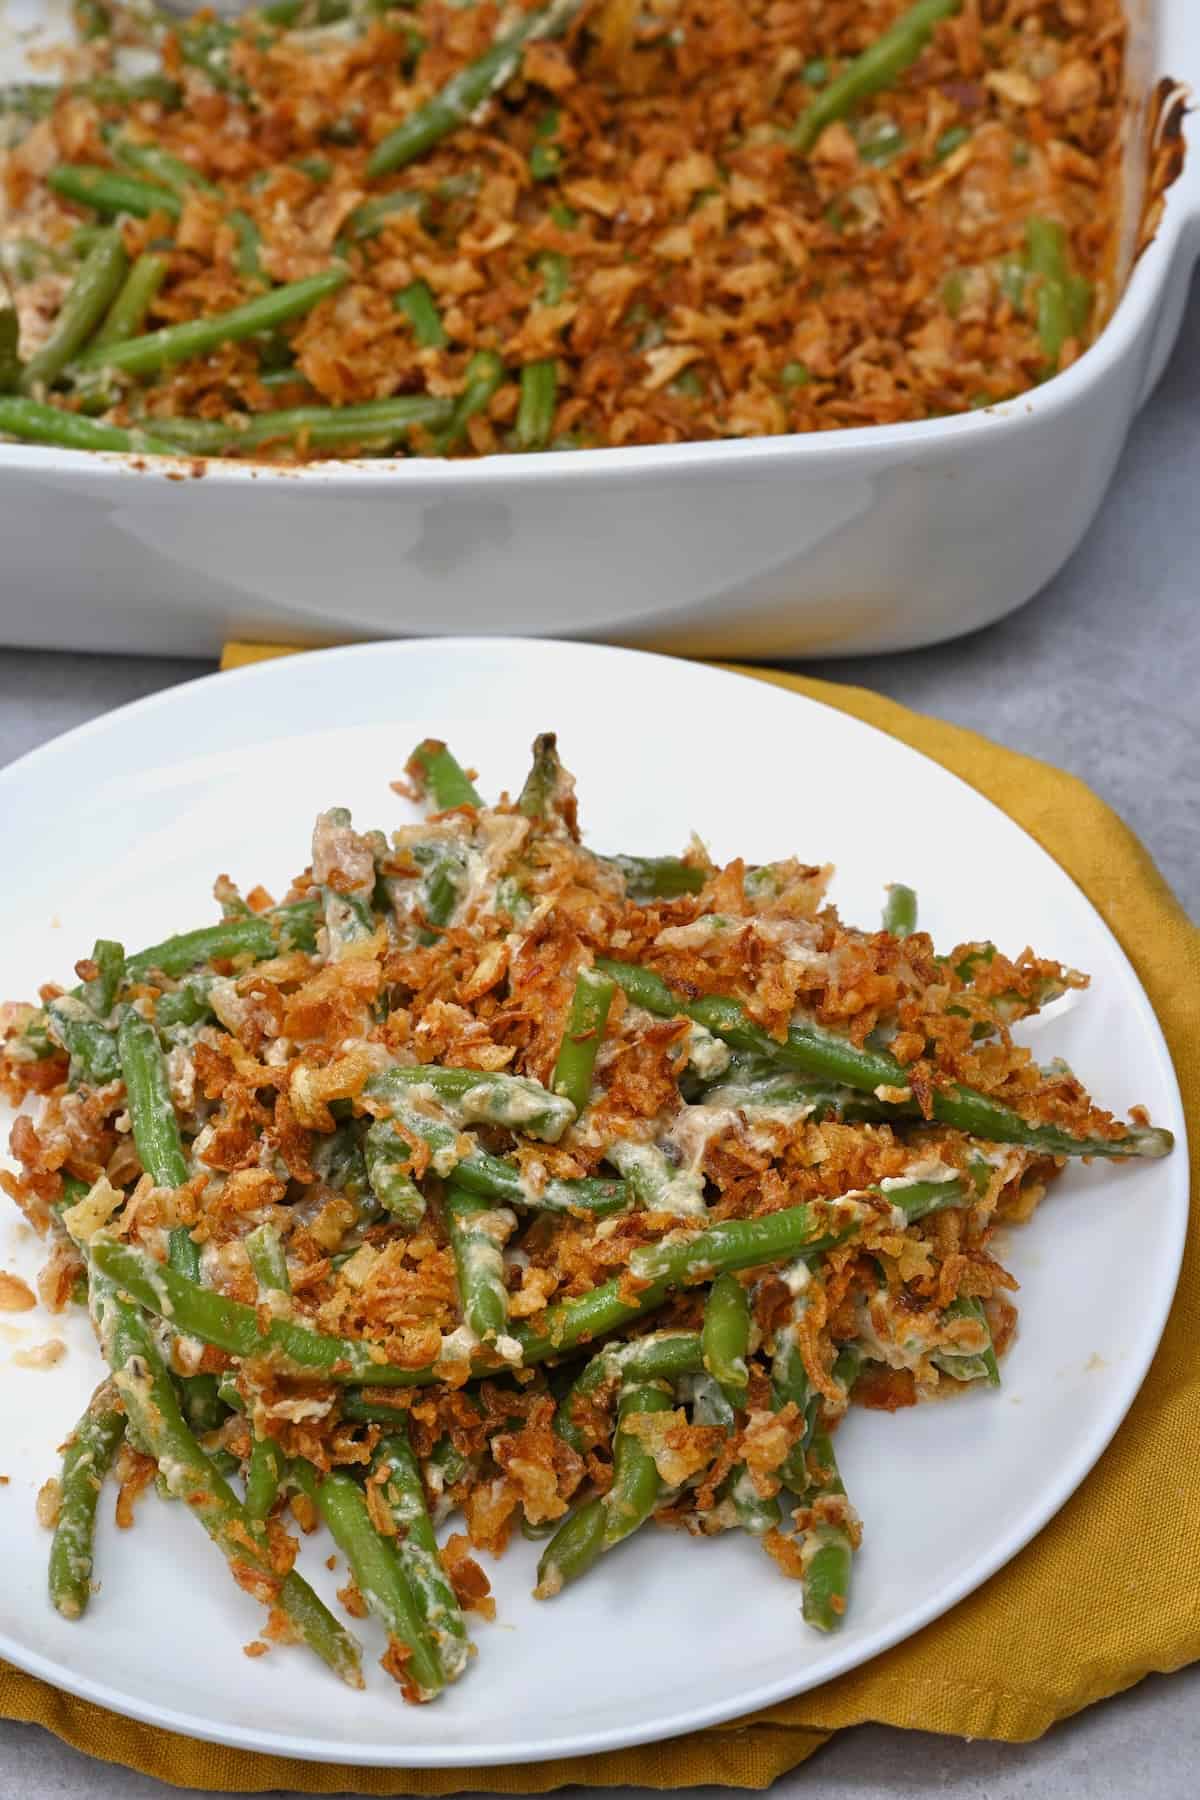 A serving of green bean casserole topped with crispy onions